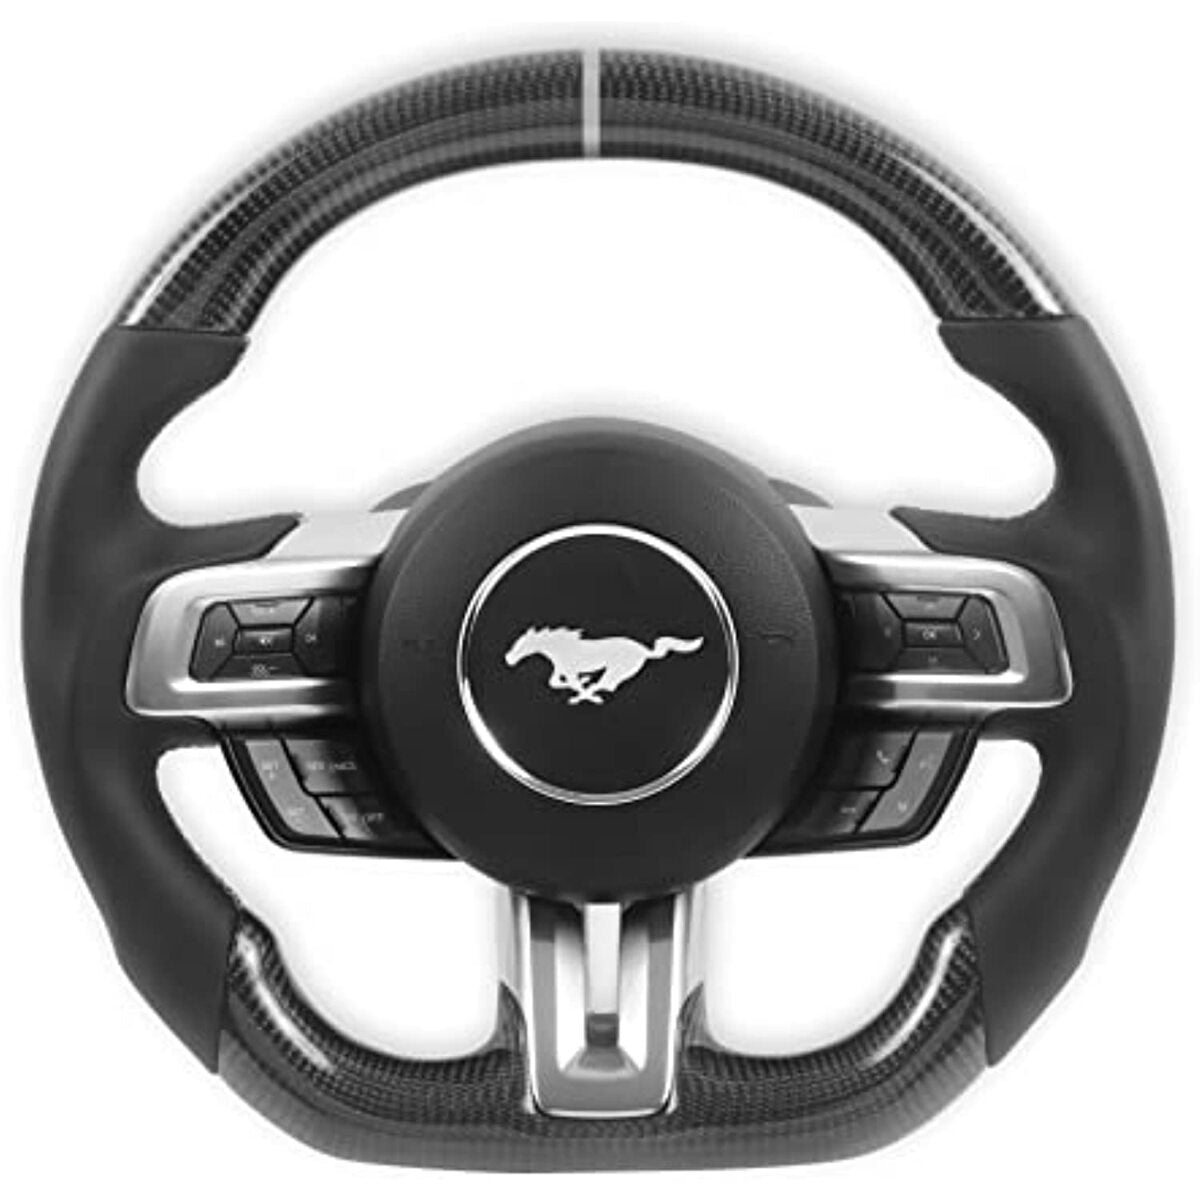 Fits 2018-2022 Ford Mustang Steering Wheel-Carbon Fiber W/Leather Grips-RK950-09